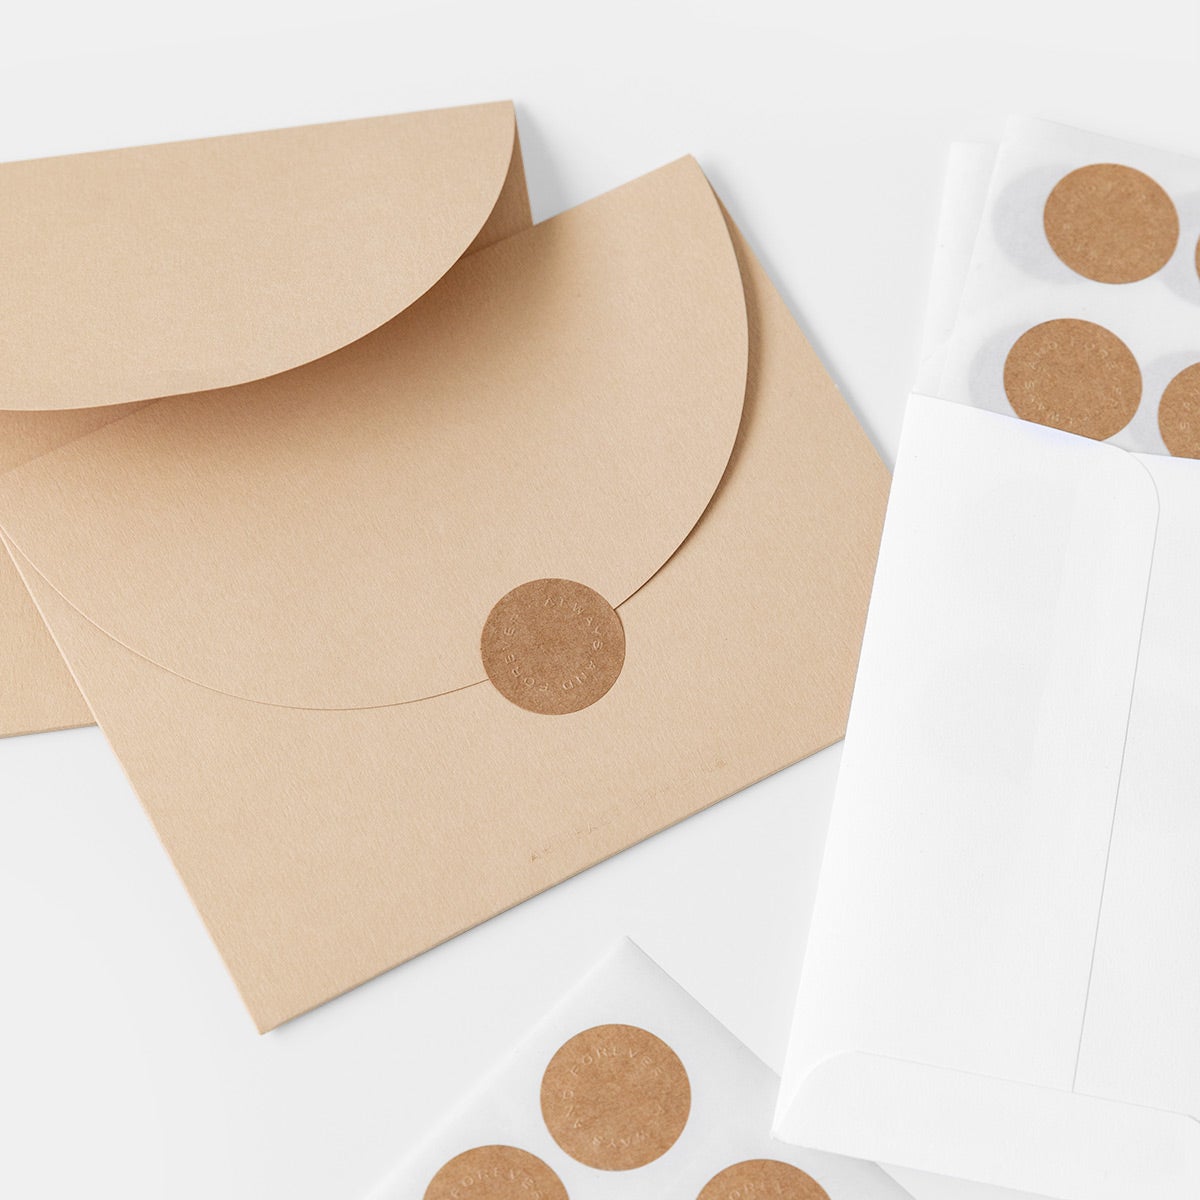 Wedding Stickers for Invitations: Do you really need them?